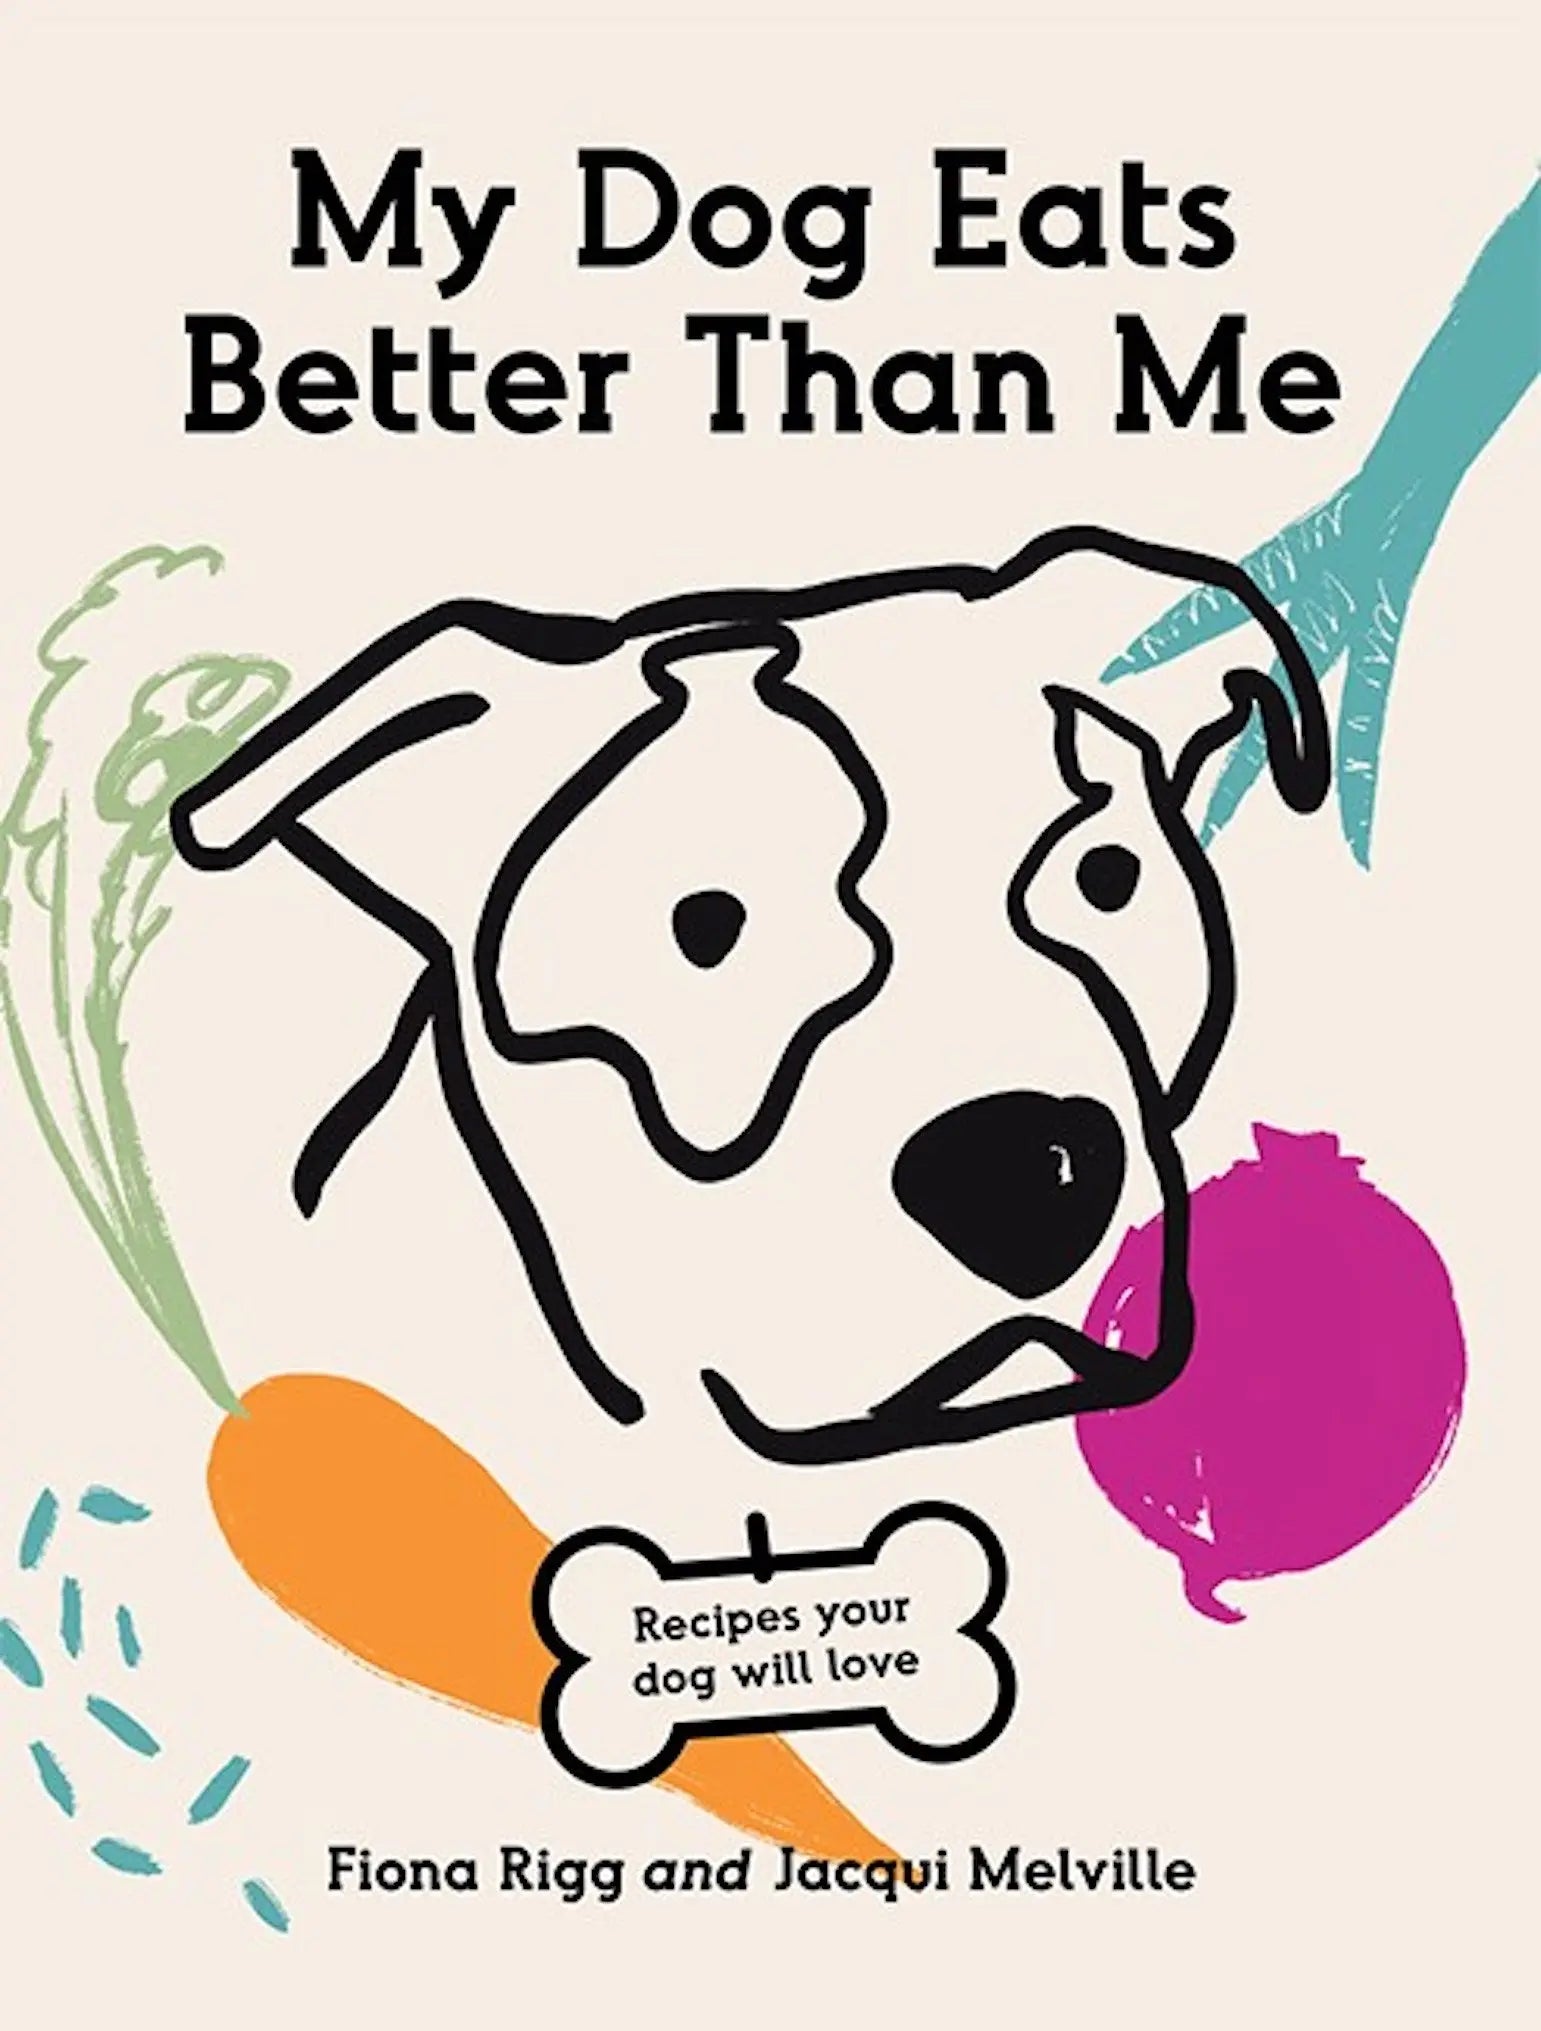 Fun Nosework For Dogs - A Book by Roy Hunter in Books